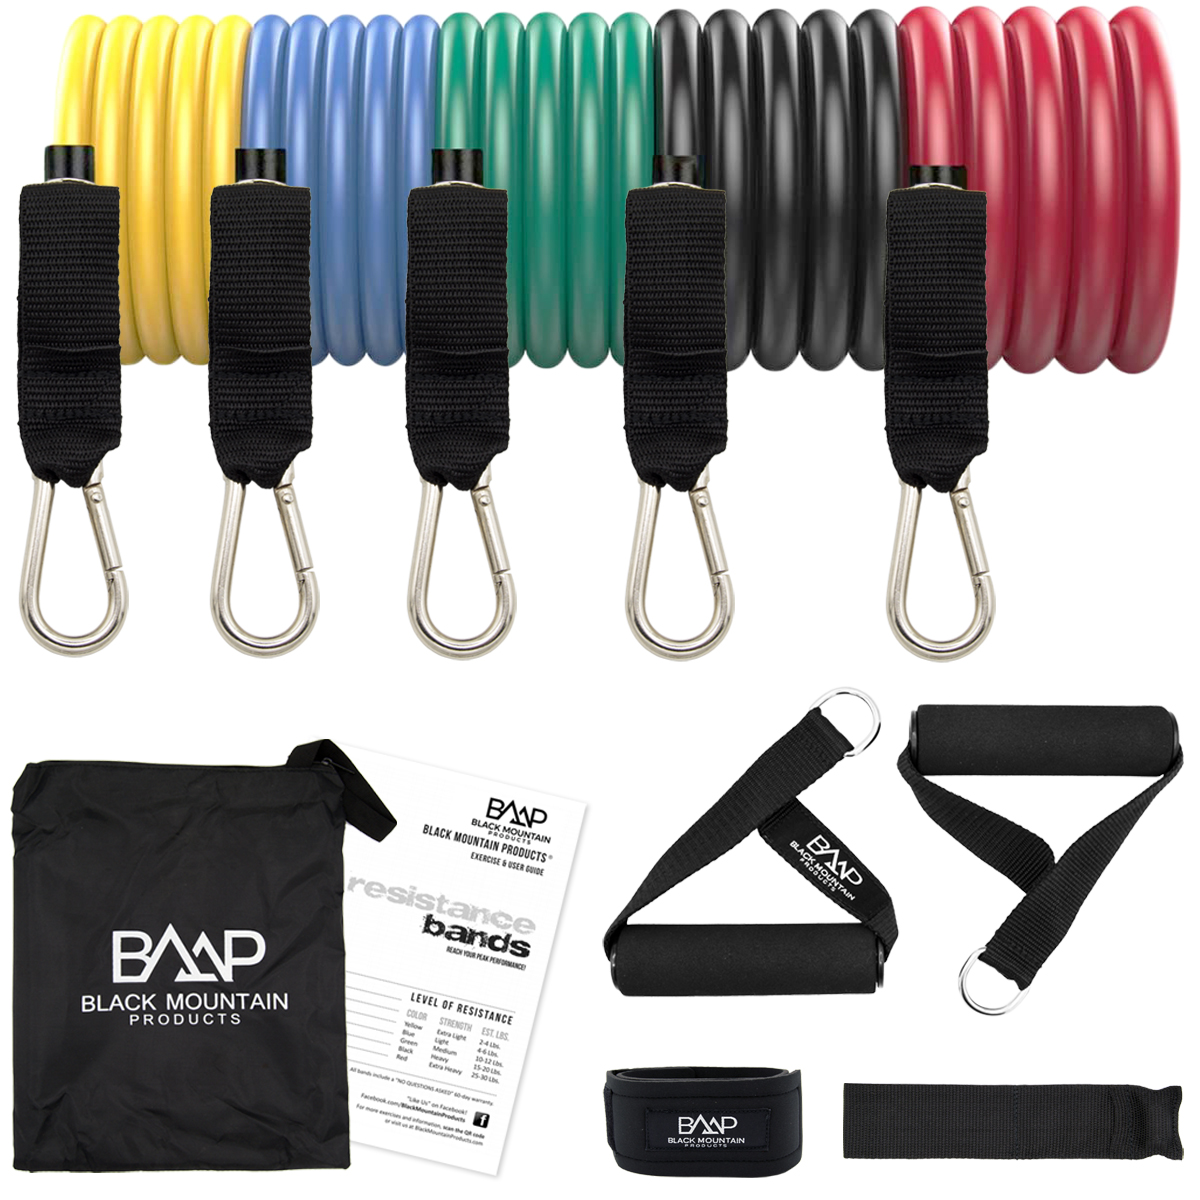 11 Pcs Resistance Bands Set Workout Bands with Metal Clips Handles Ankle Strap 